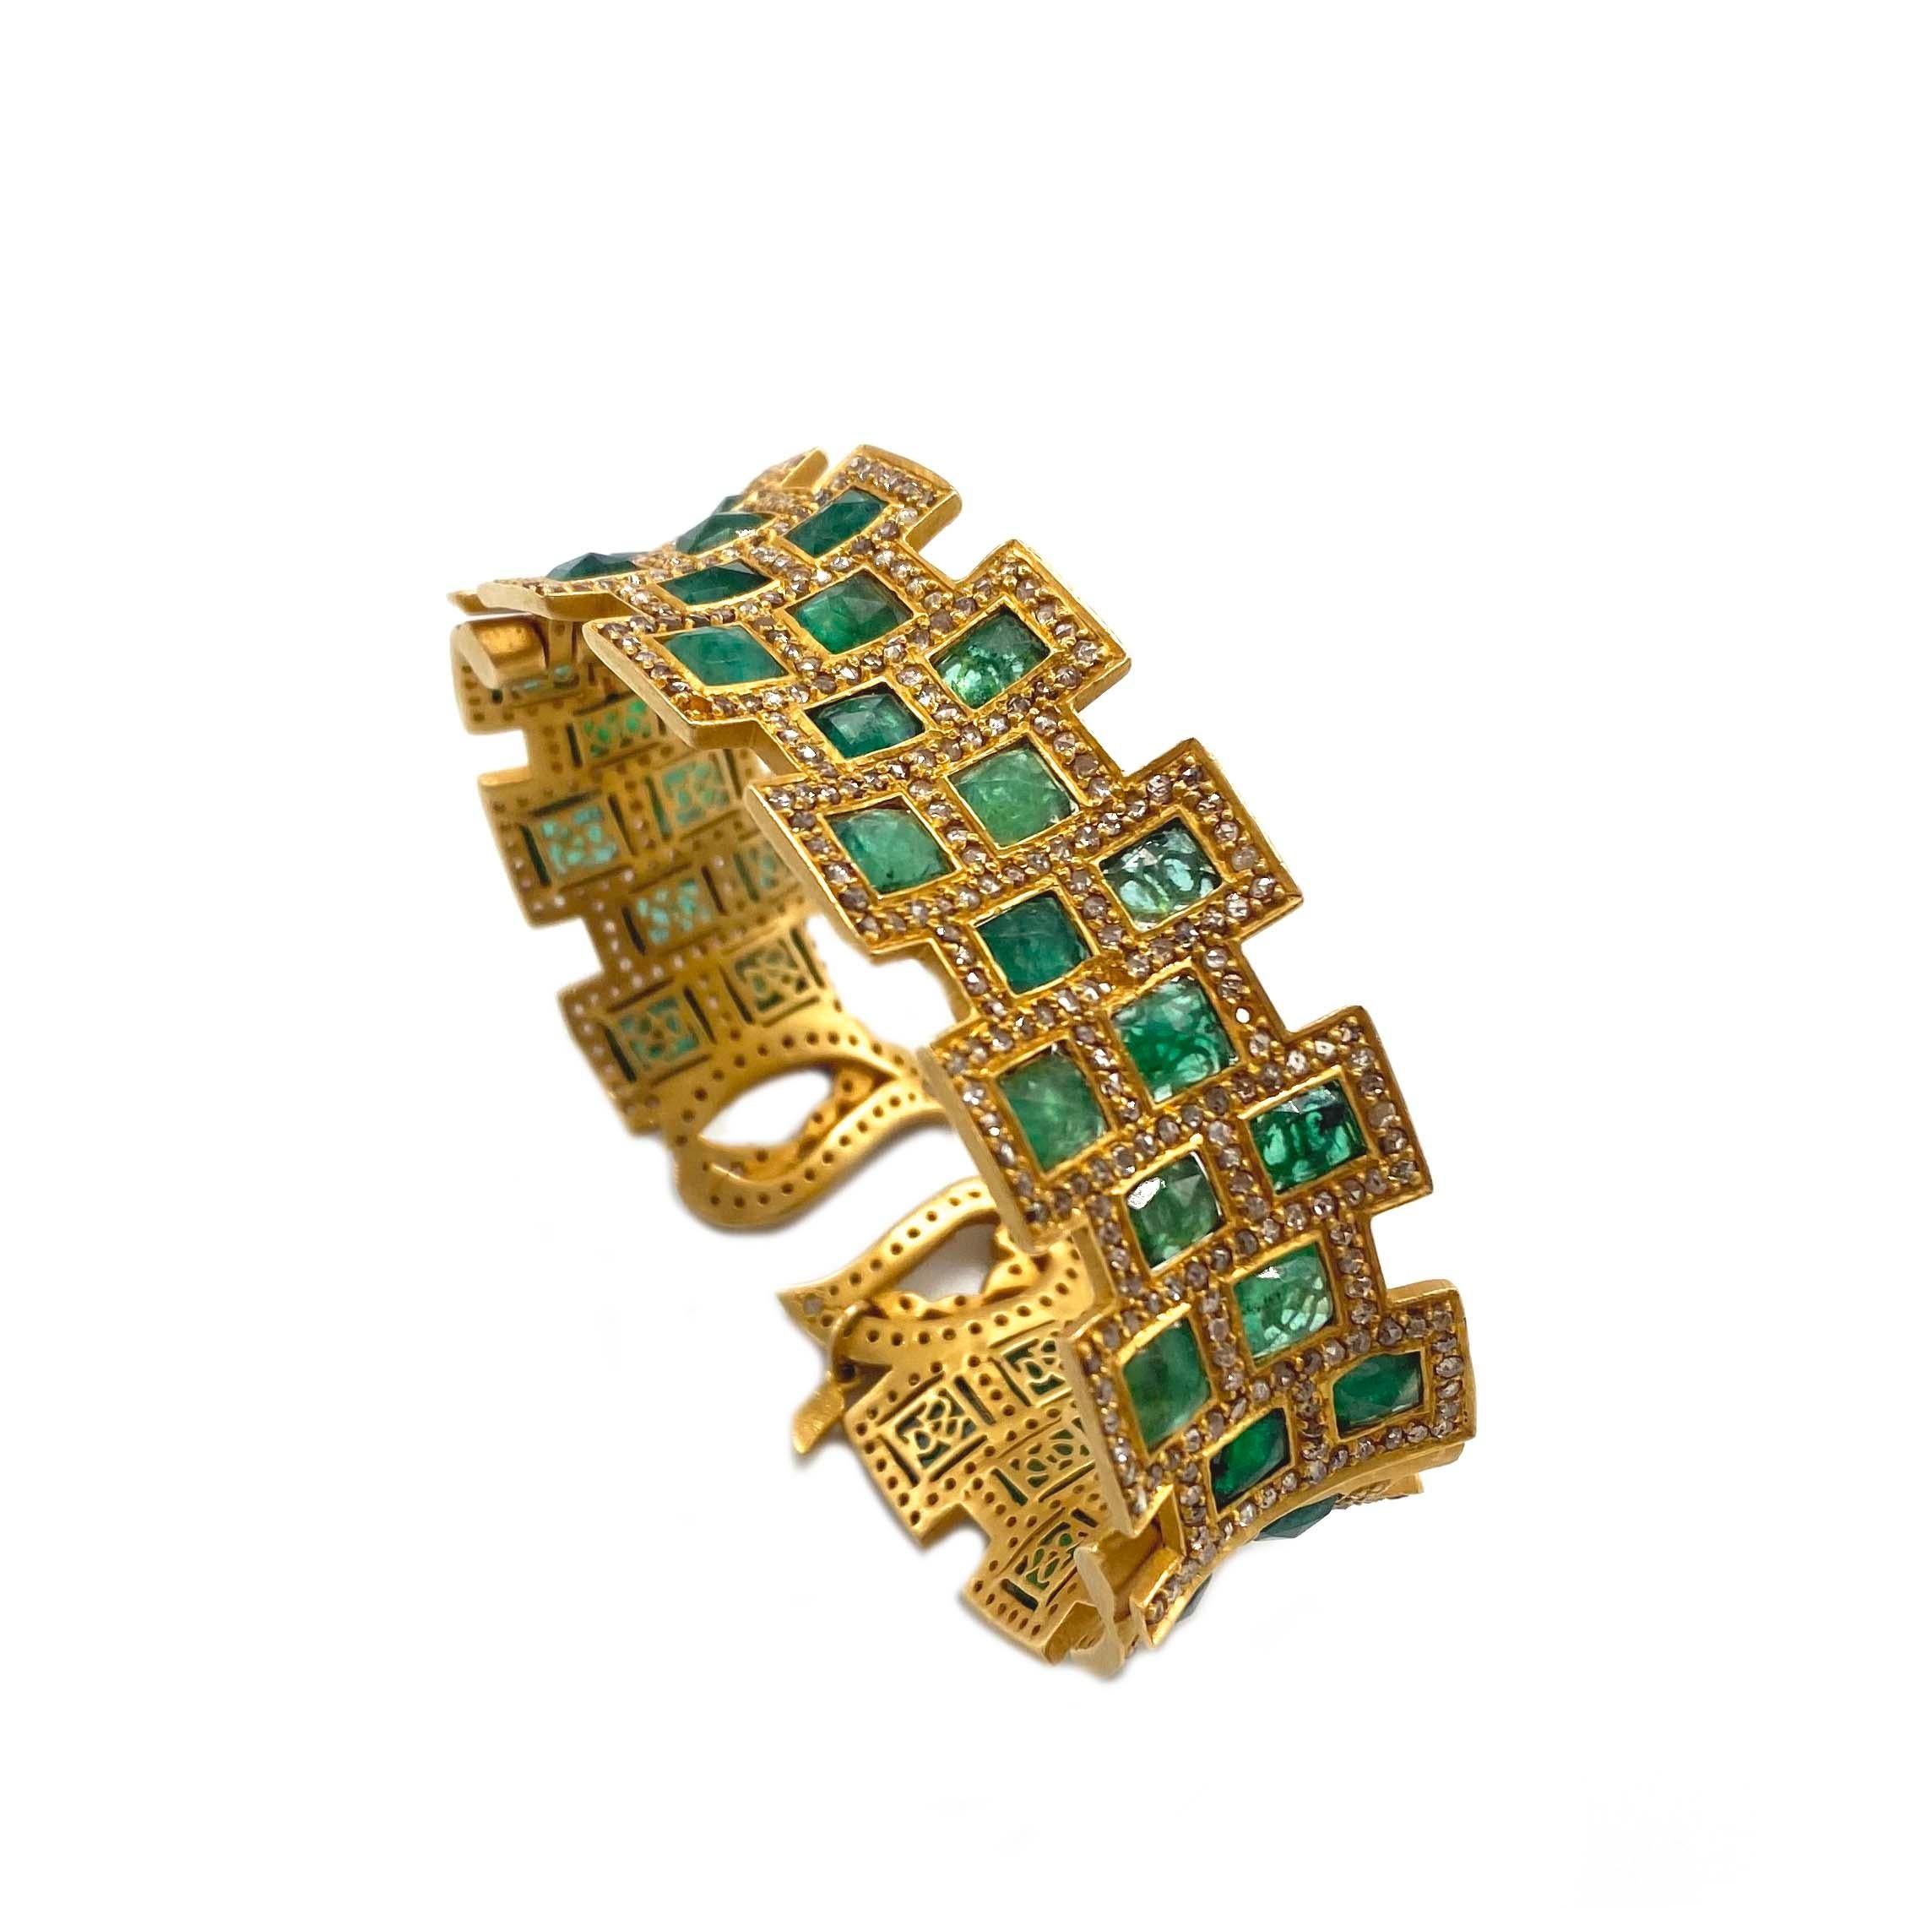 Stunning statement bracelet from Coomi set in the bold color of Emerald weighing approximately 24.40cts and Diamonds 6.61cts made with 20 Karat Yellow Gold, brought to you from the luminosity collection, which consists of bold design and reflects